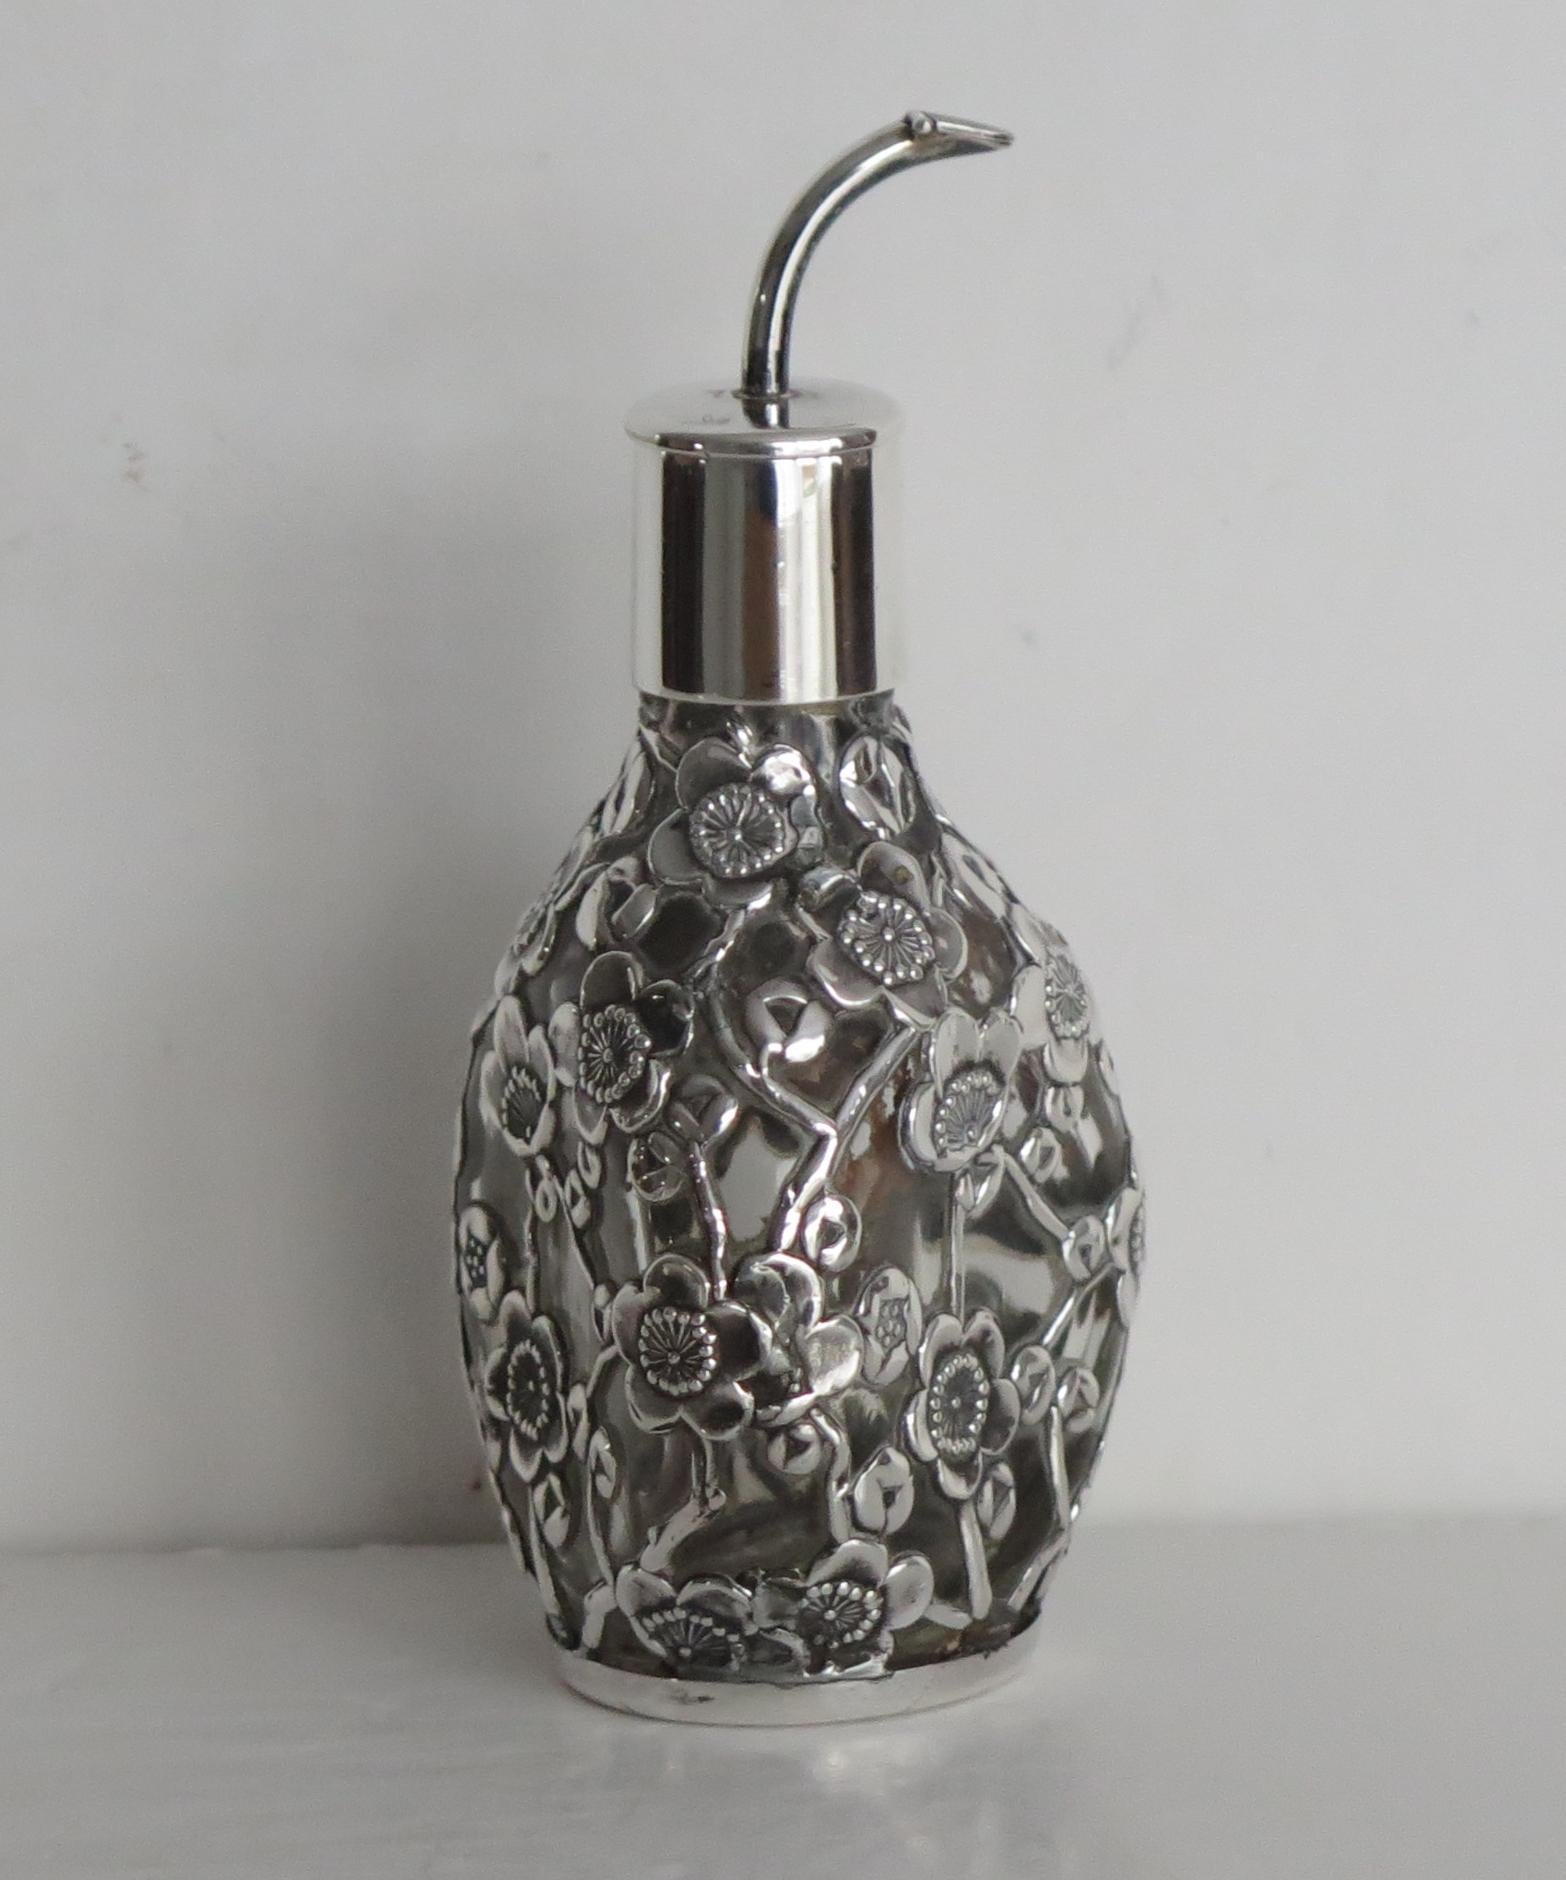 Hand-Crafted Edwardian Perfume or Scent Bottle Sterling Silver Filigree over Glass, Ca 1900